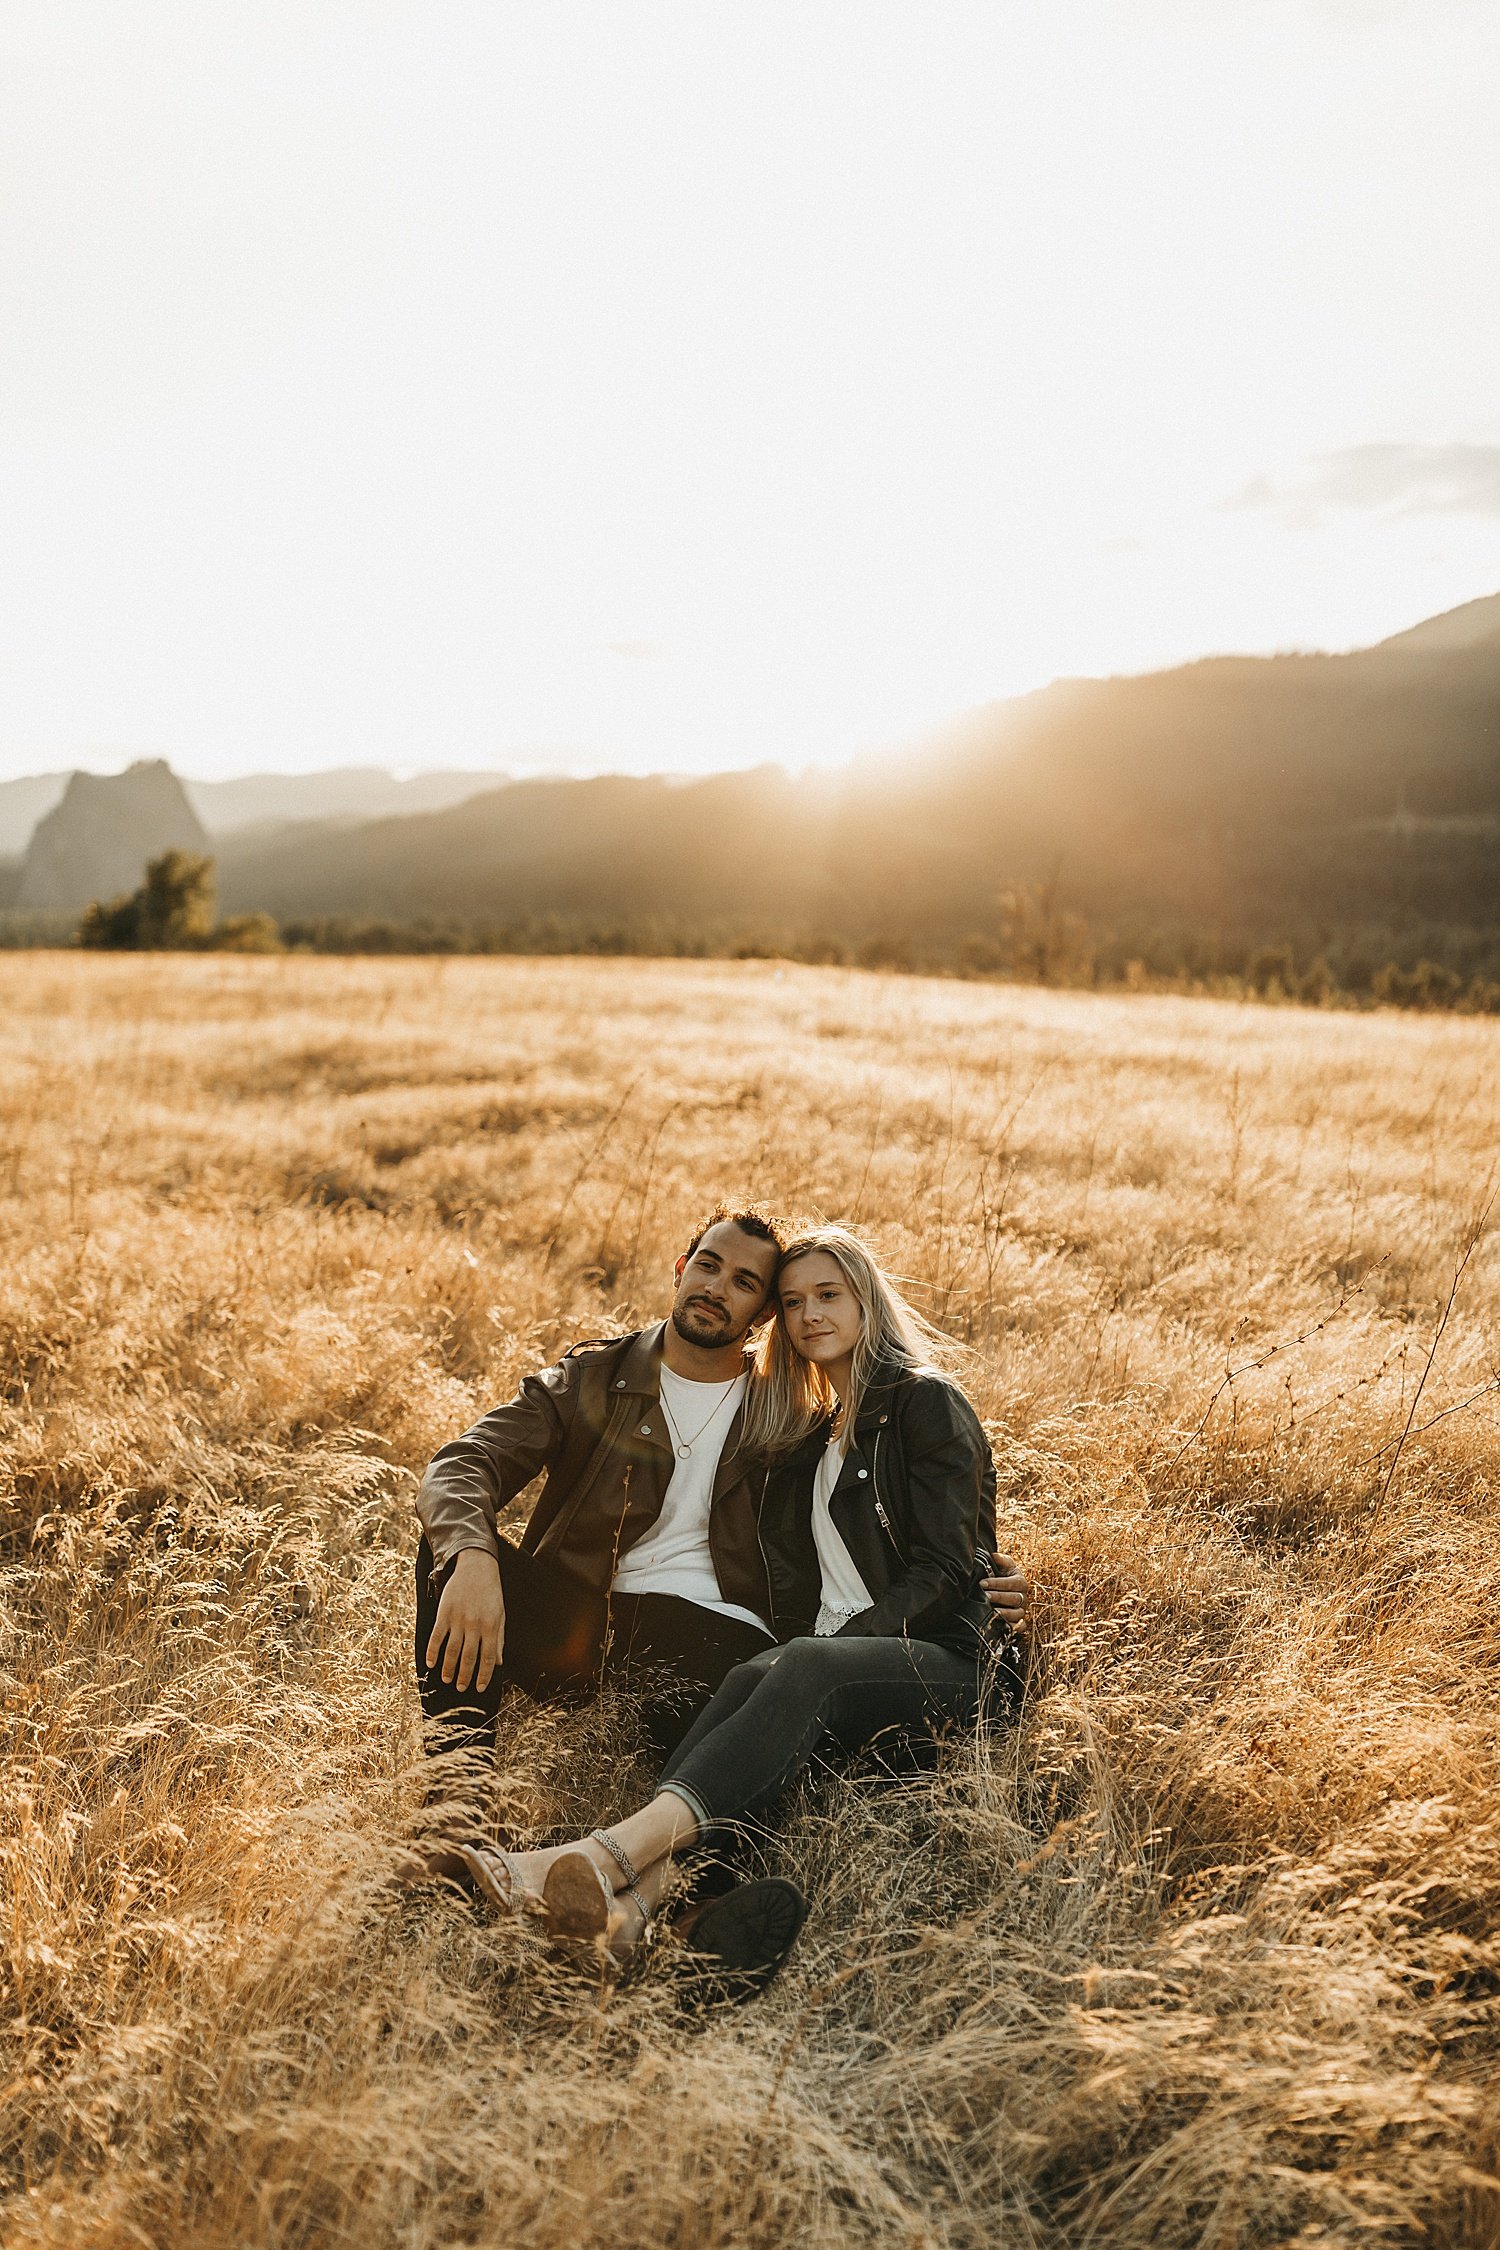 Open Field Couples Photography Inspiration